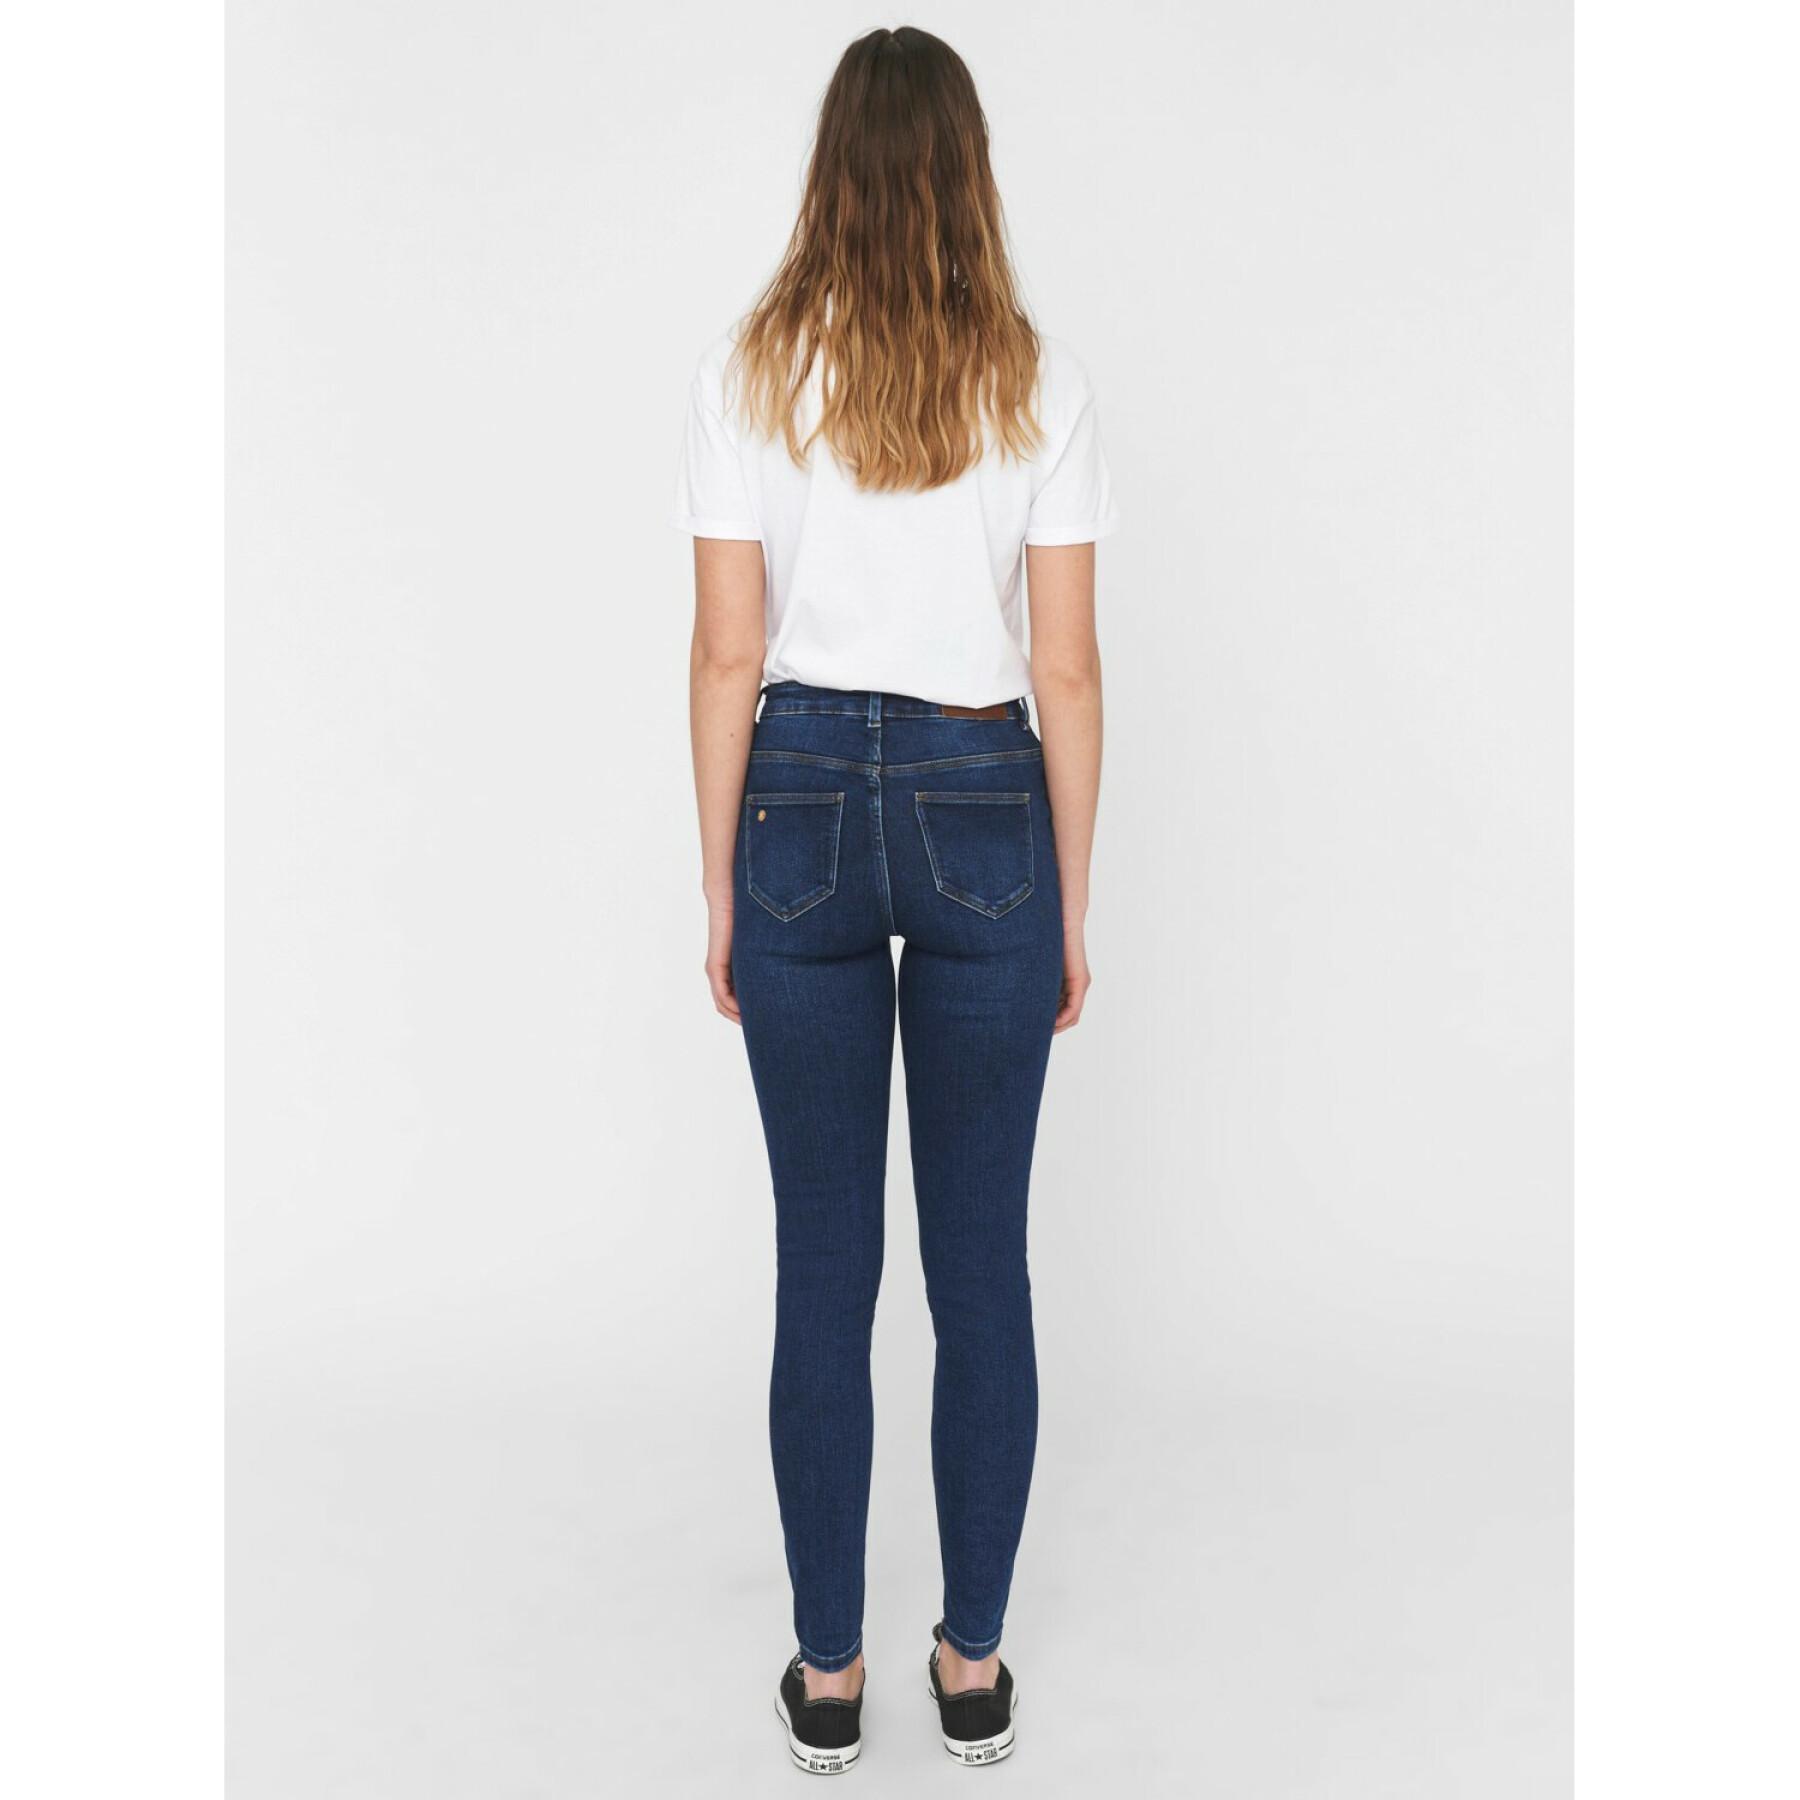 Jeans femme Noisy May nmcallie chic